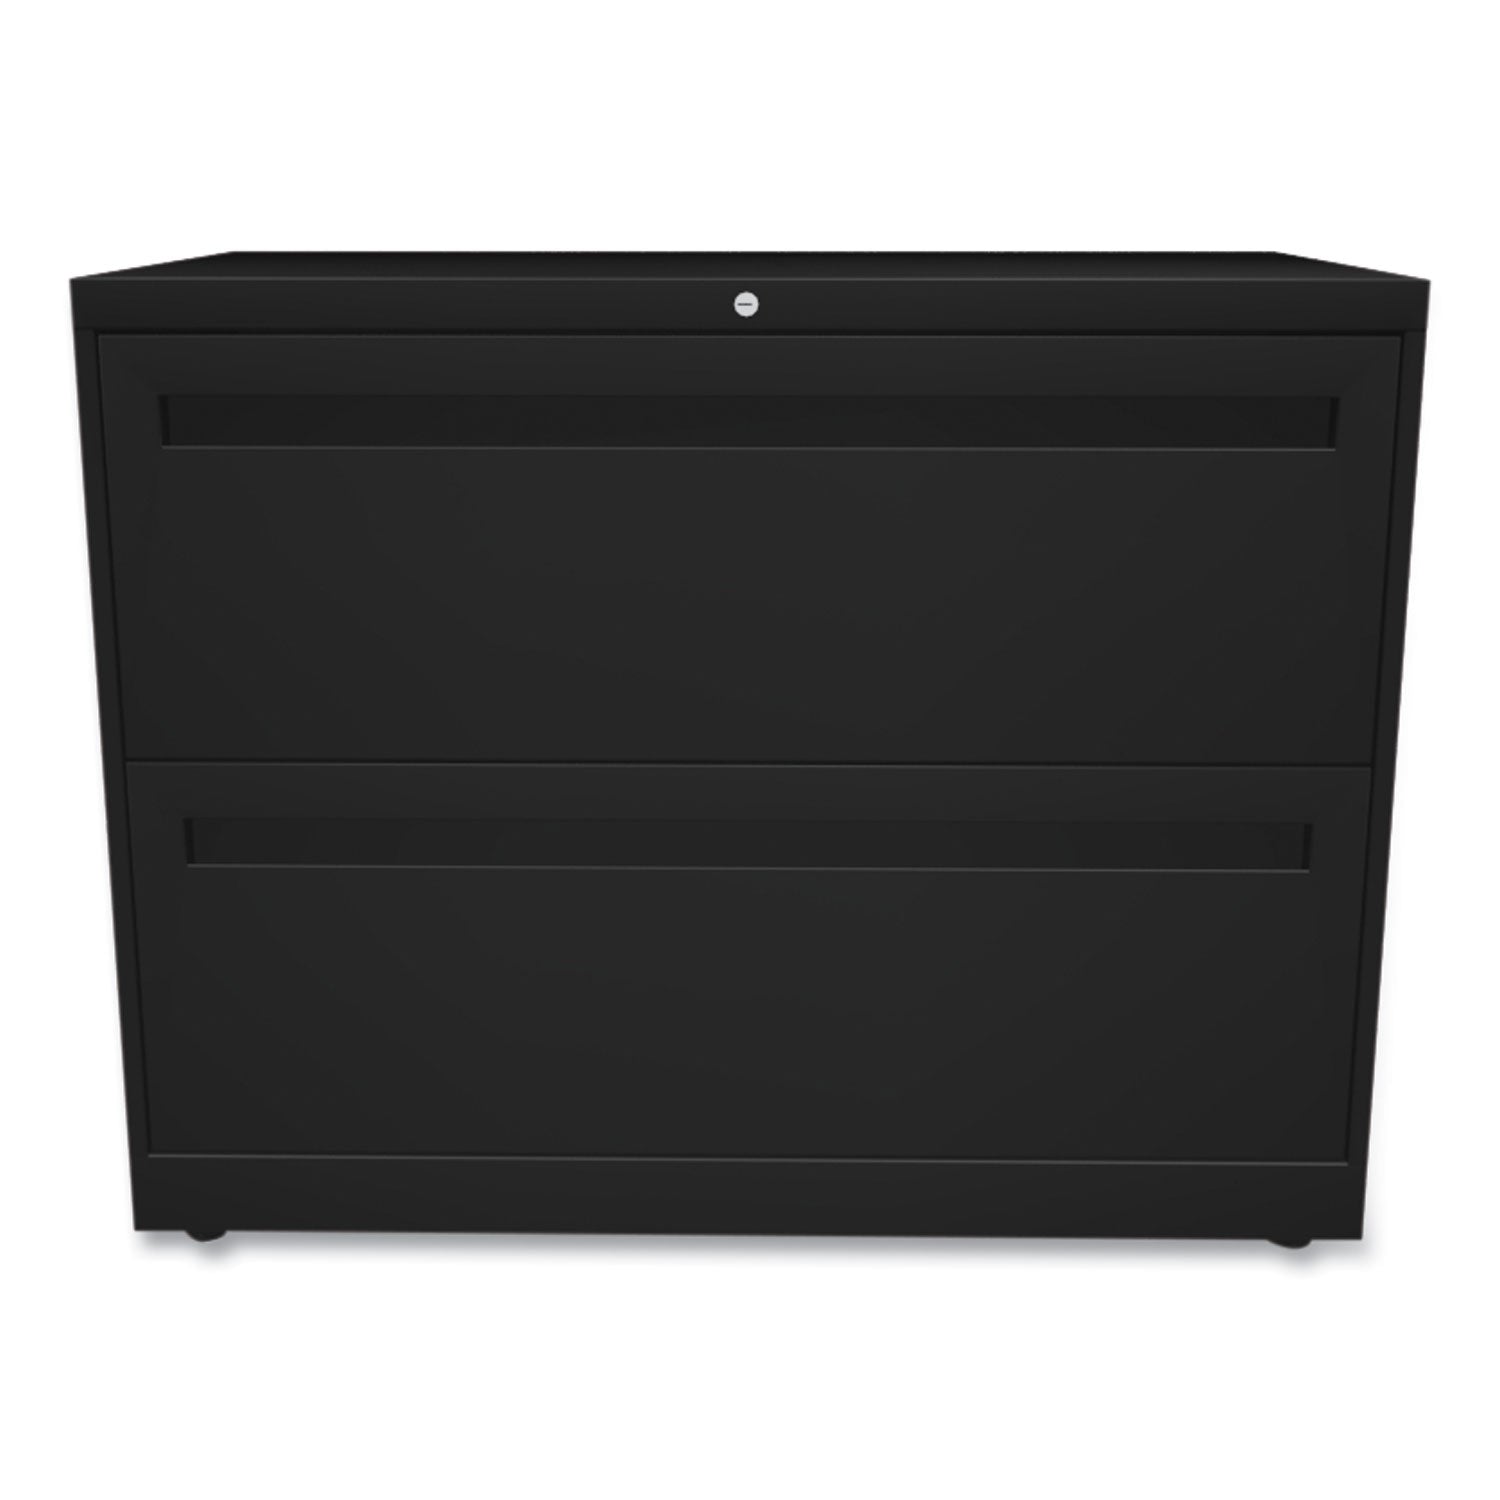 Brigade 700 Series Lateral File, 2 Legal/Letter-Size File Drawers, Black, 36" x 18" x 28 - 